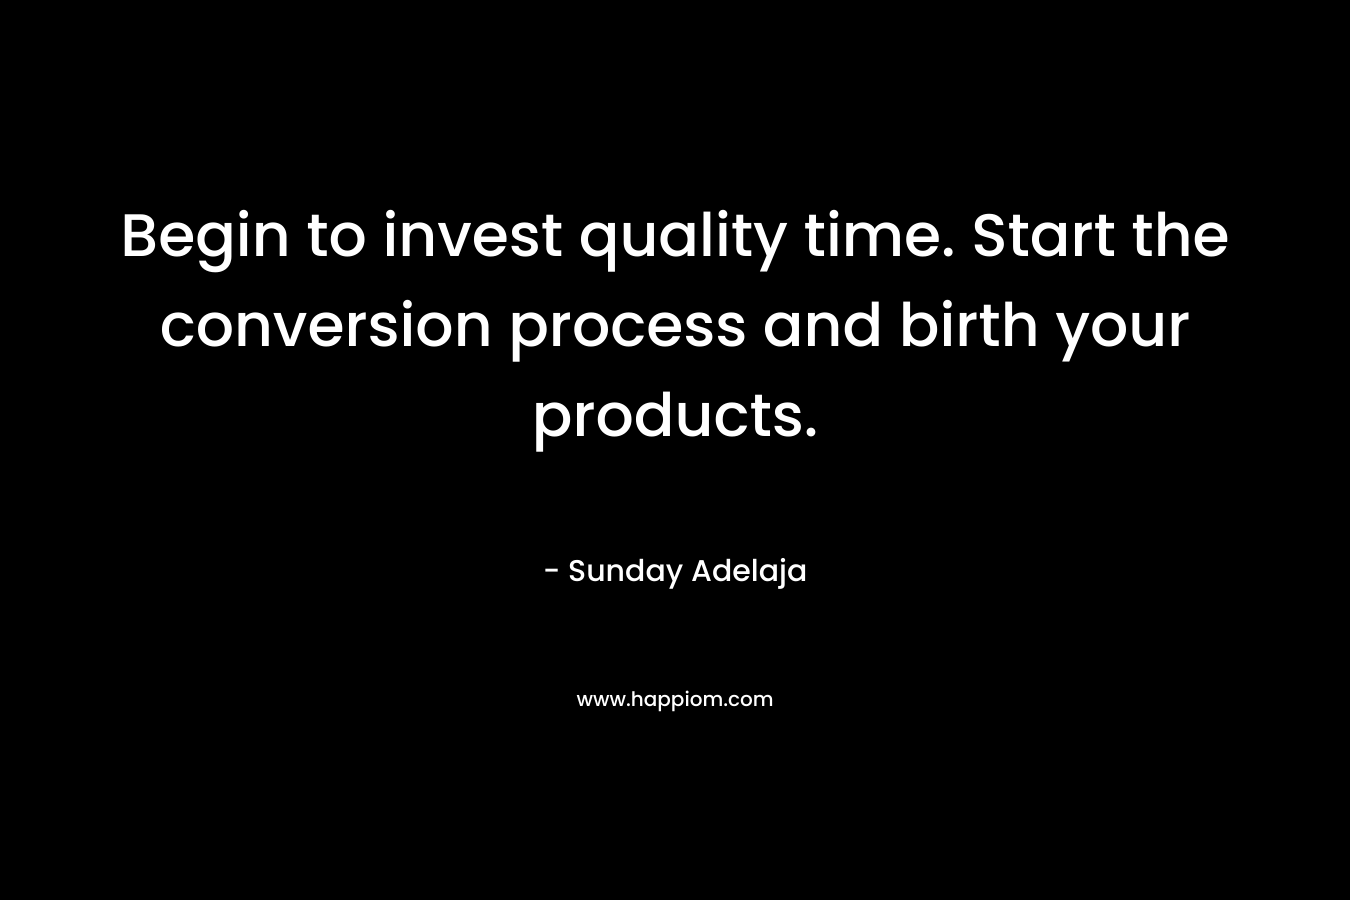 Begin to invest quality time. Start the conversion process and birth your products.